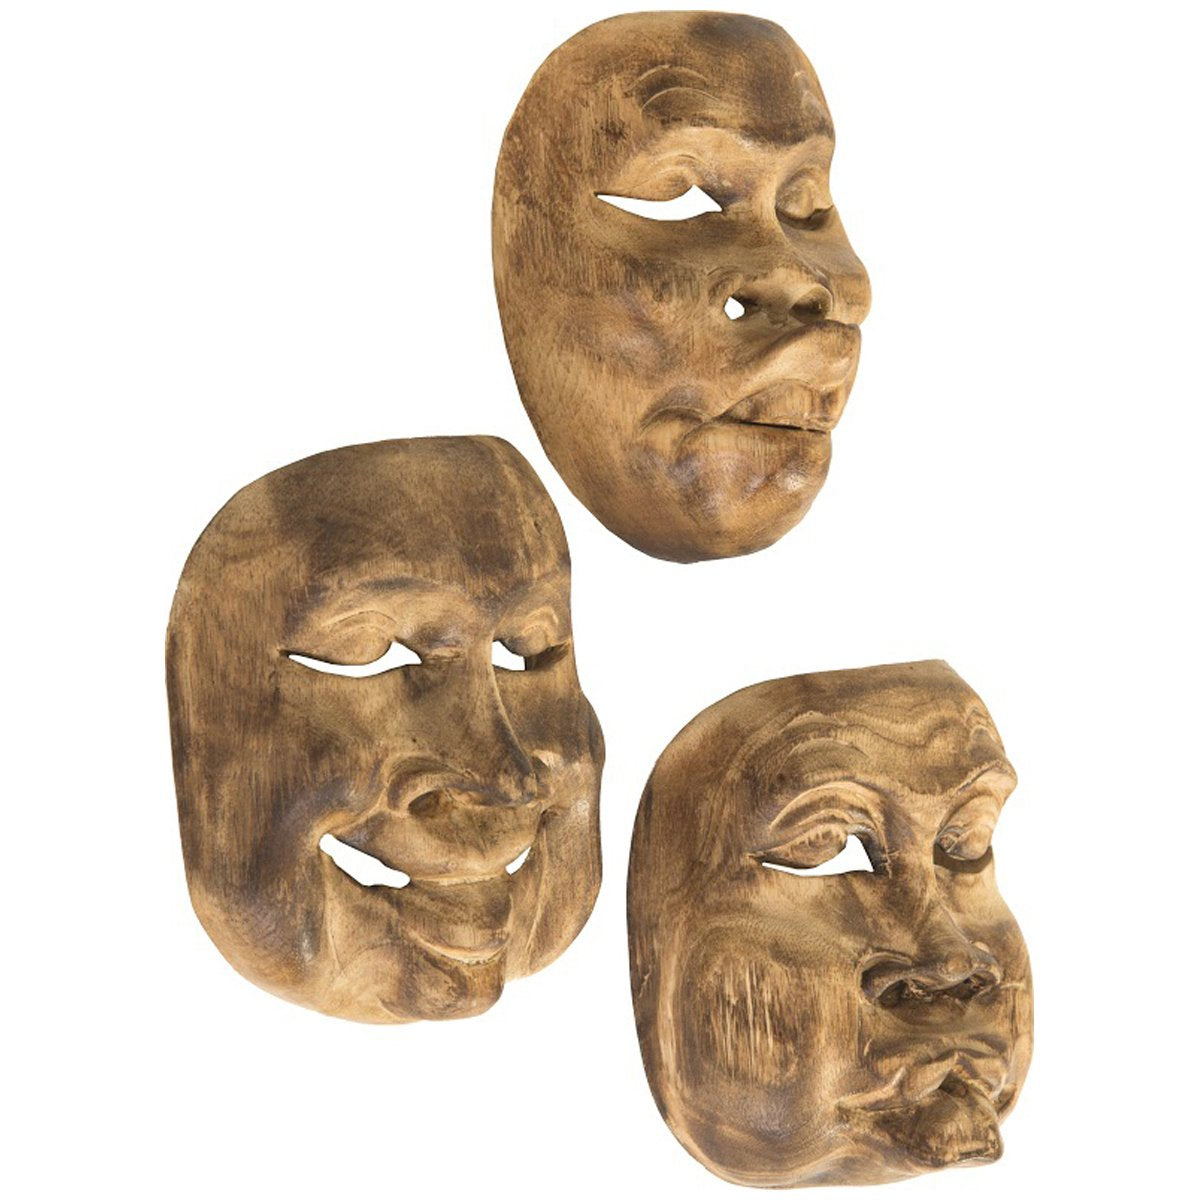 Phillips Collection Indonesian Masks, 3-Piece Set